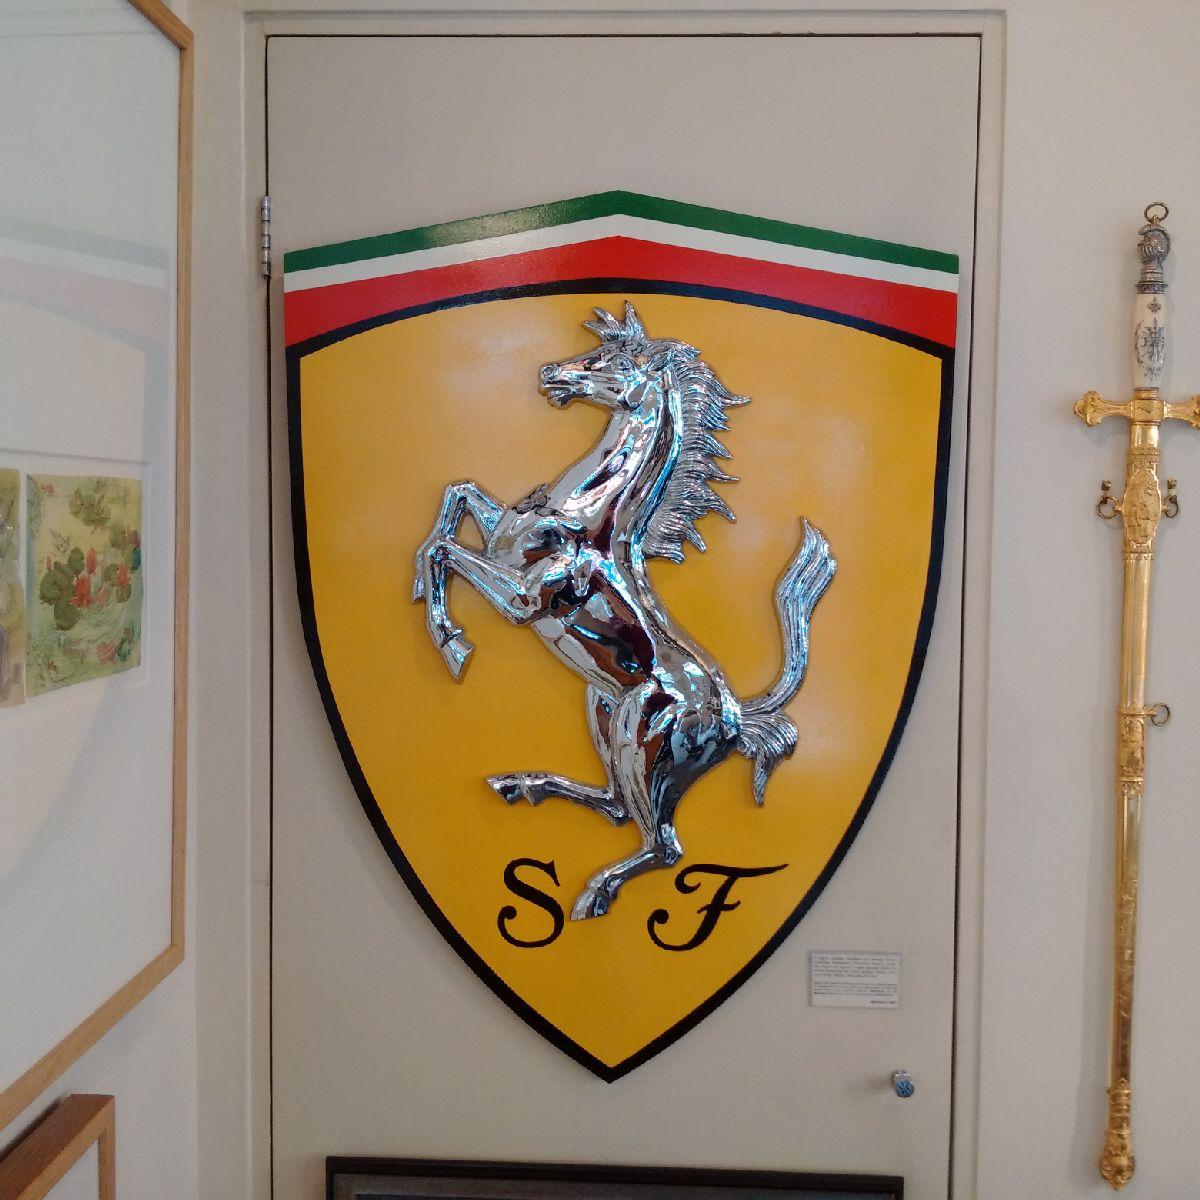 A highly unusual chromed cast bronze Ferrari Cavallino Rampante (‘Prancing Horse’) relief, the figure set against a hand painted Giallo Fly shield emulating the iconic symbol, and bearing the ‘S F’ initials of Scuderia Ferrari underneath. The relief